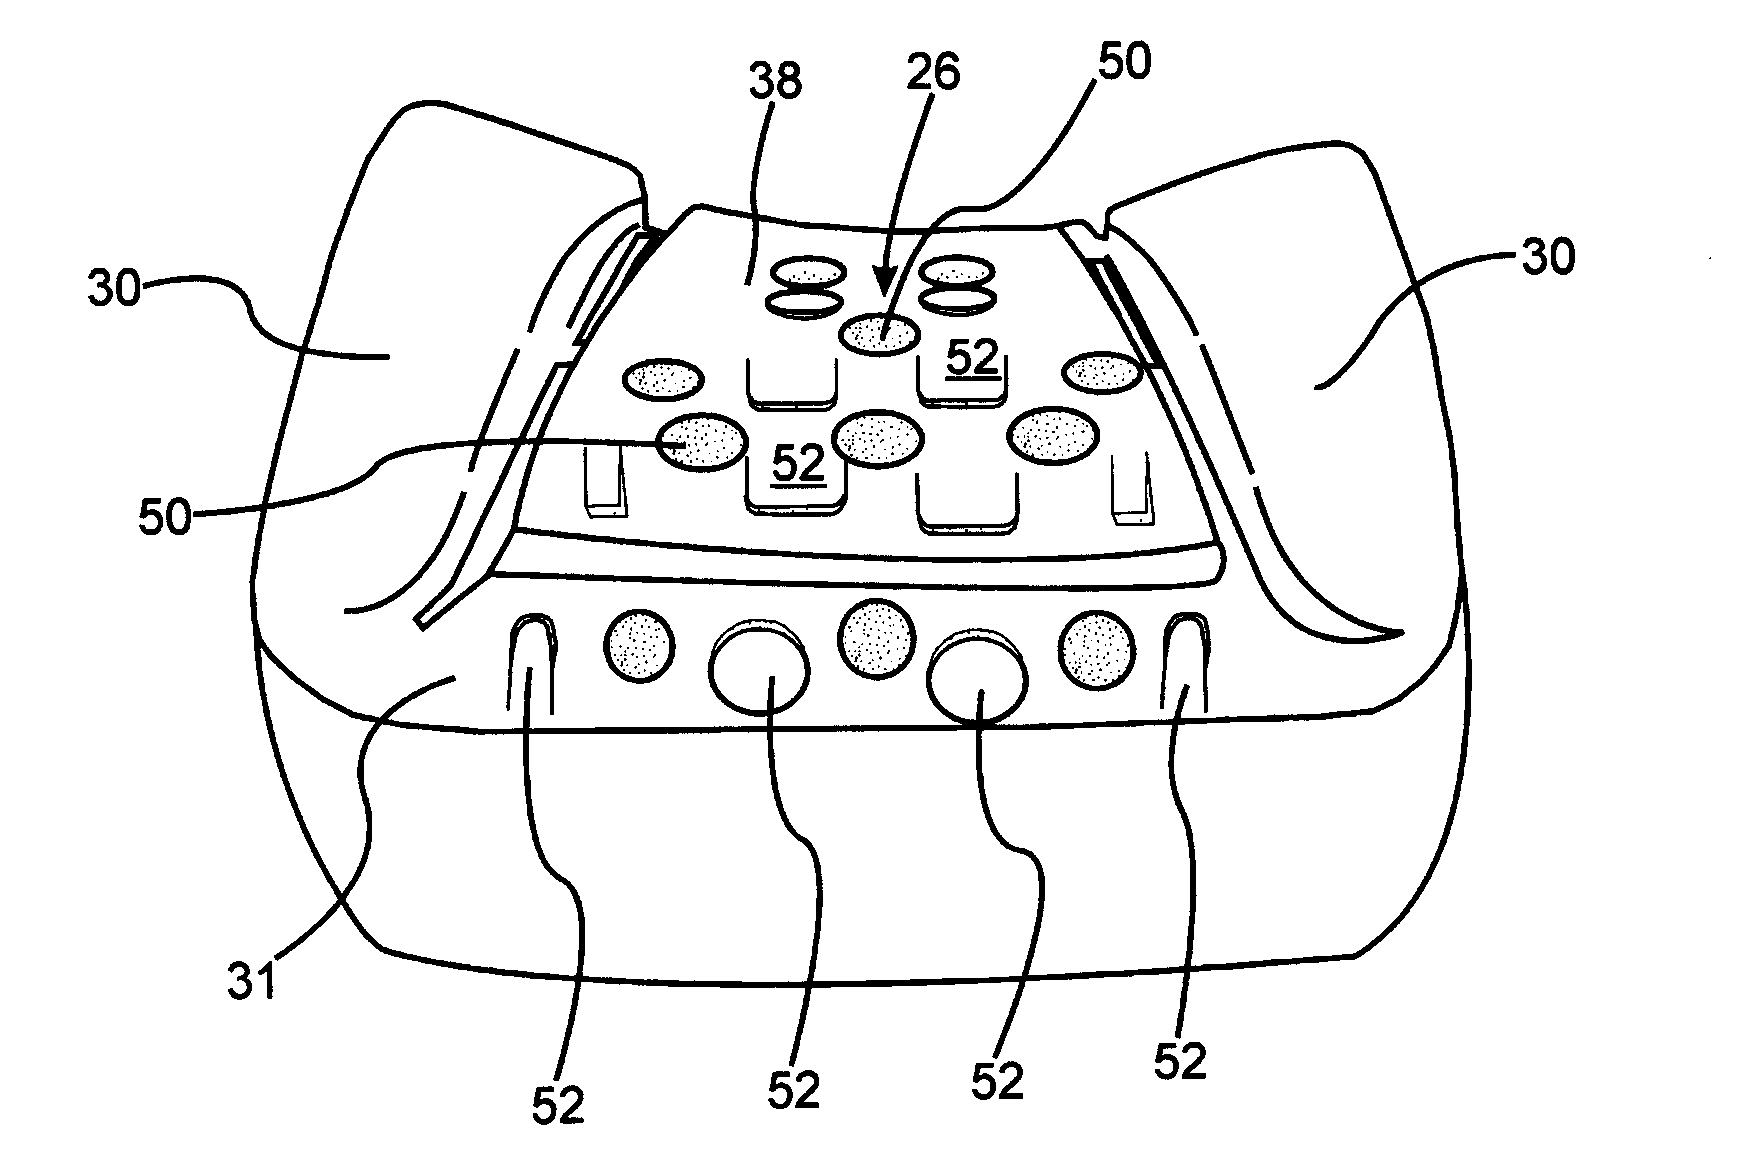 Vehicle seat assembly having a hardness gradient via "A" surface intrusions and/or protrusions